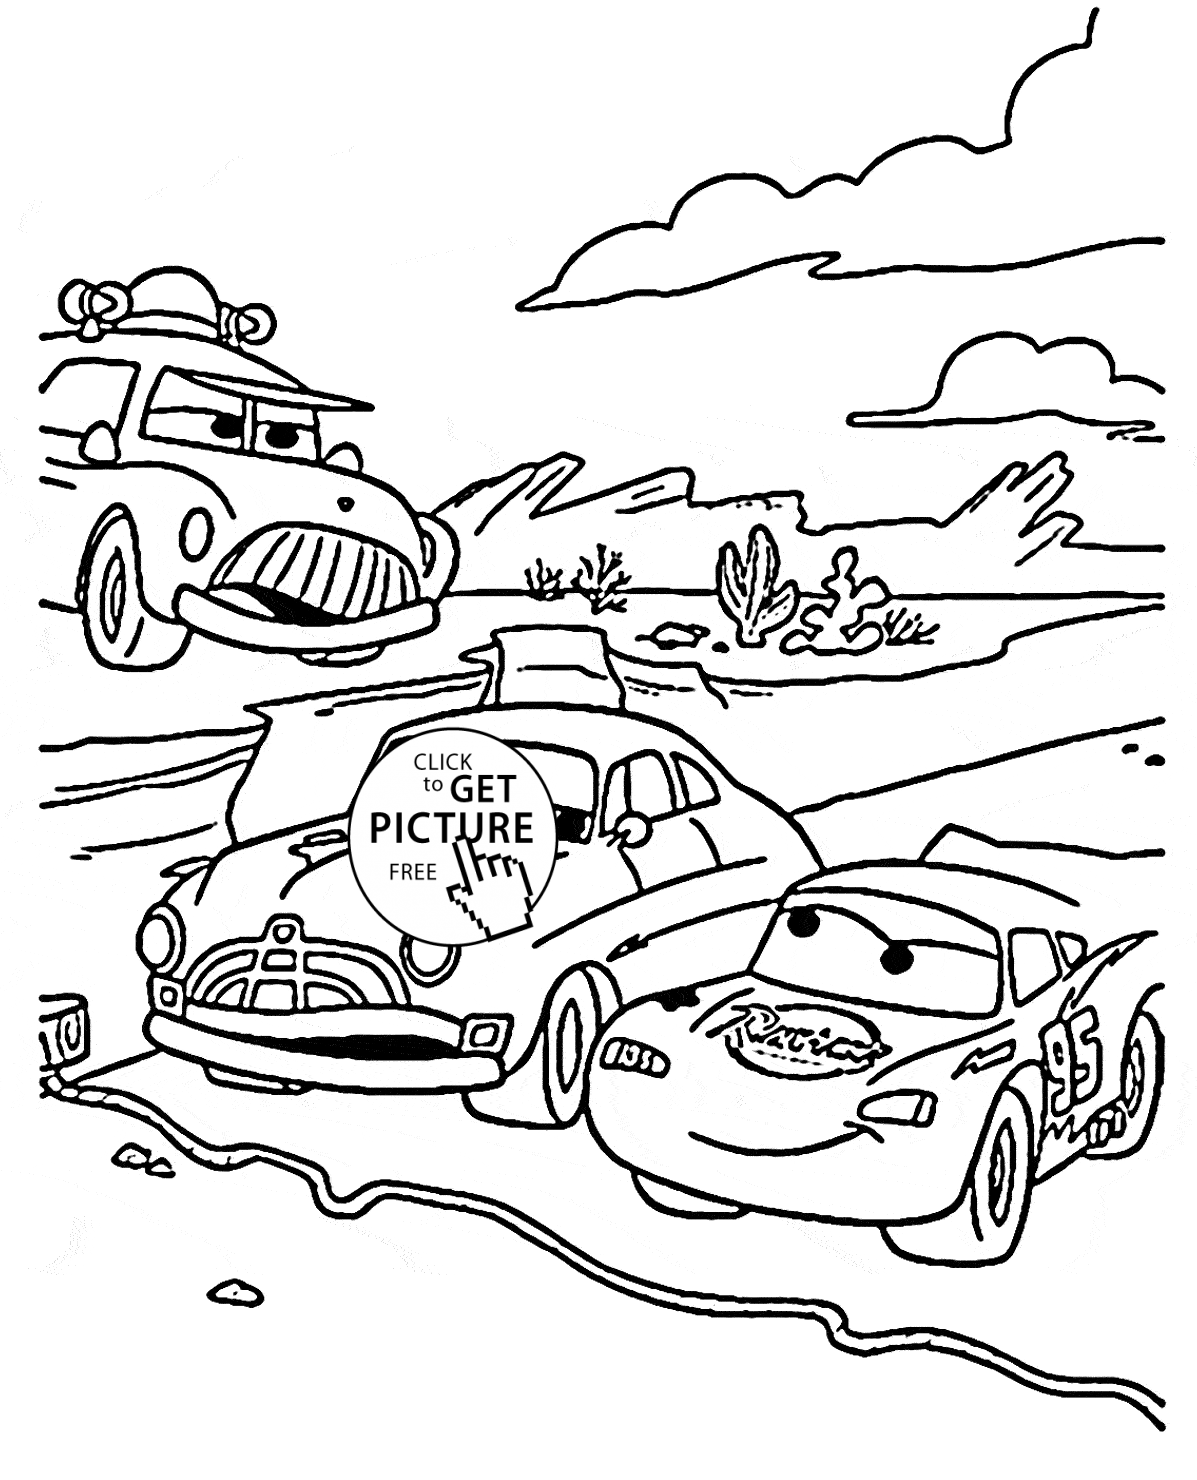 Track Race Cars coloring page for kids, disney coloring pages ...